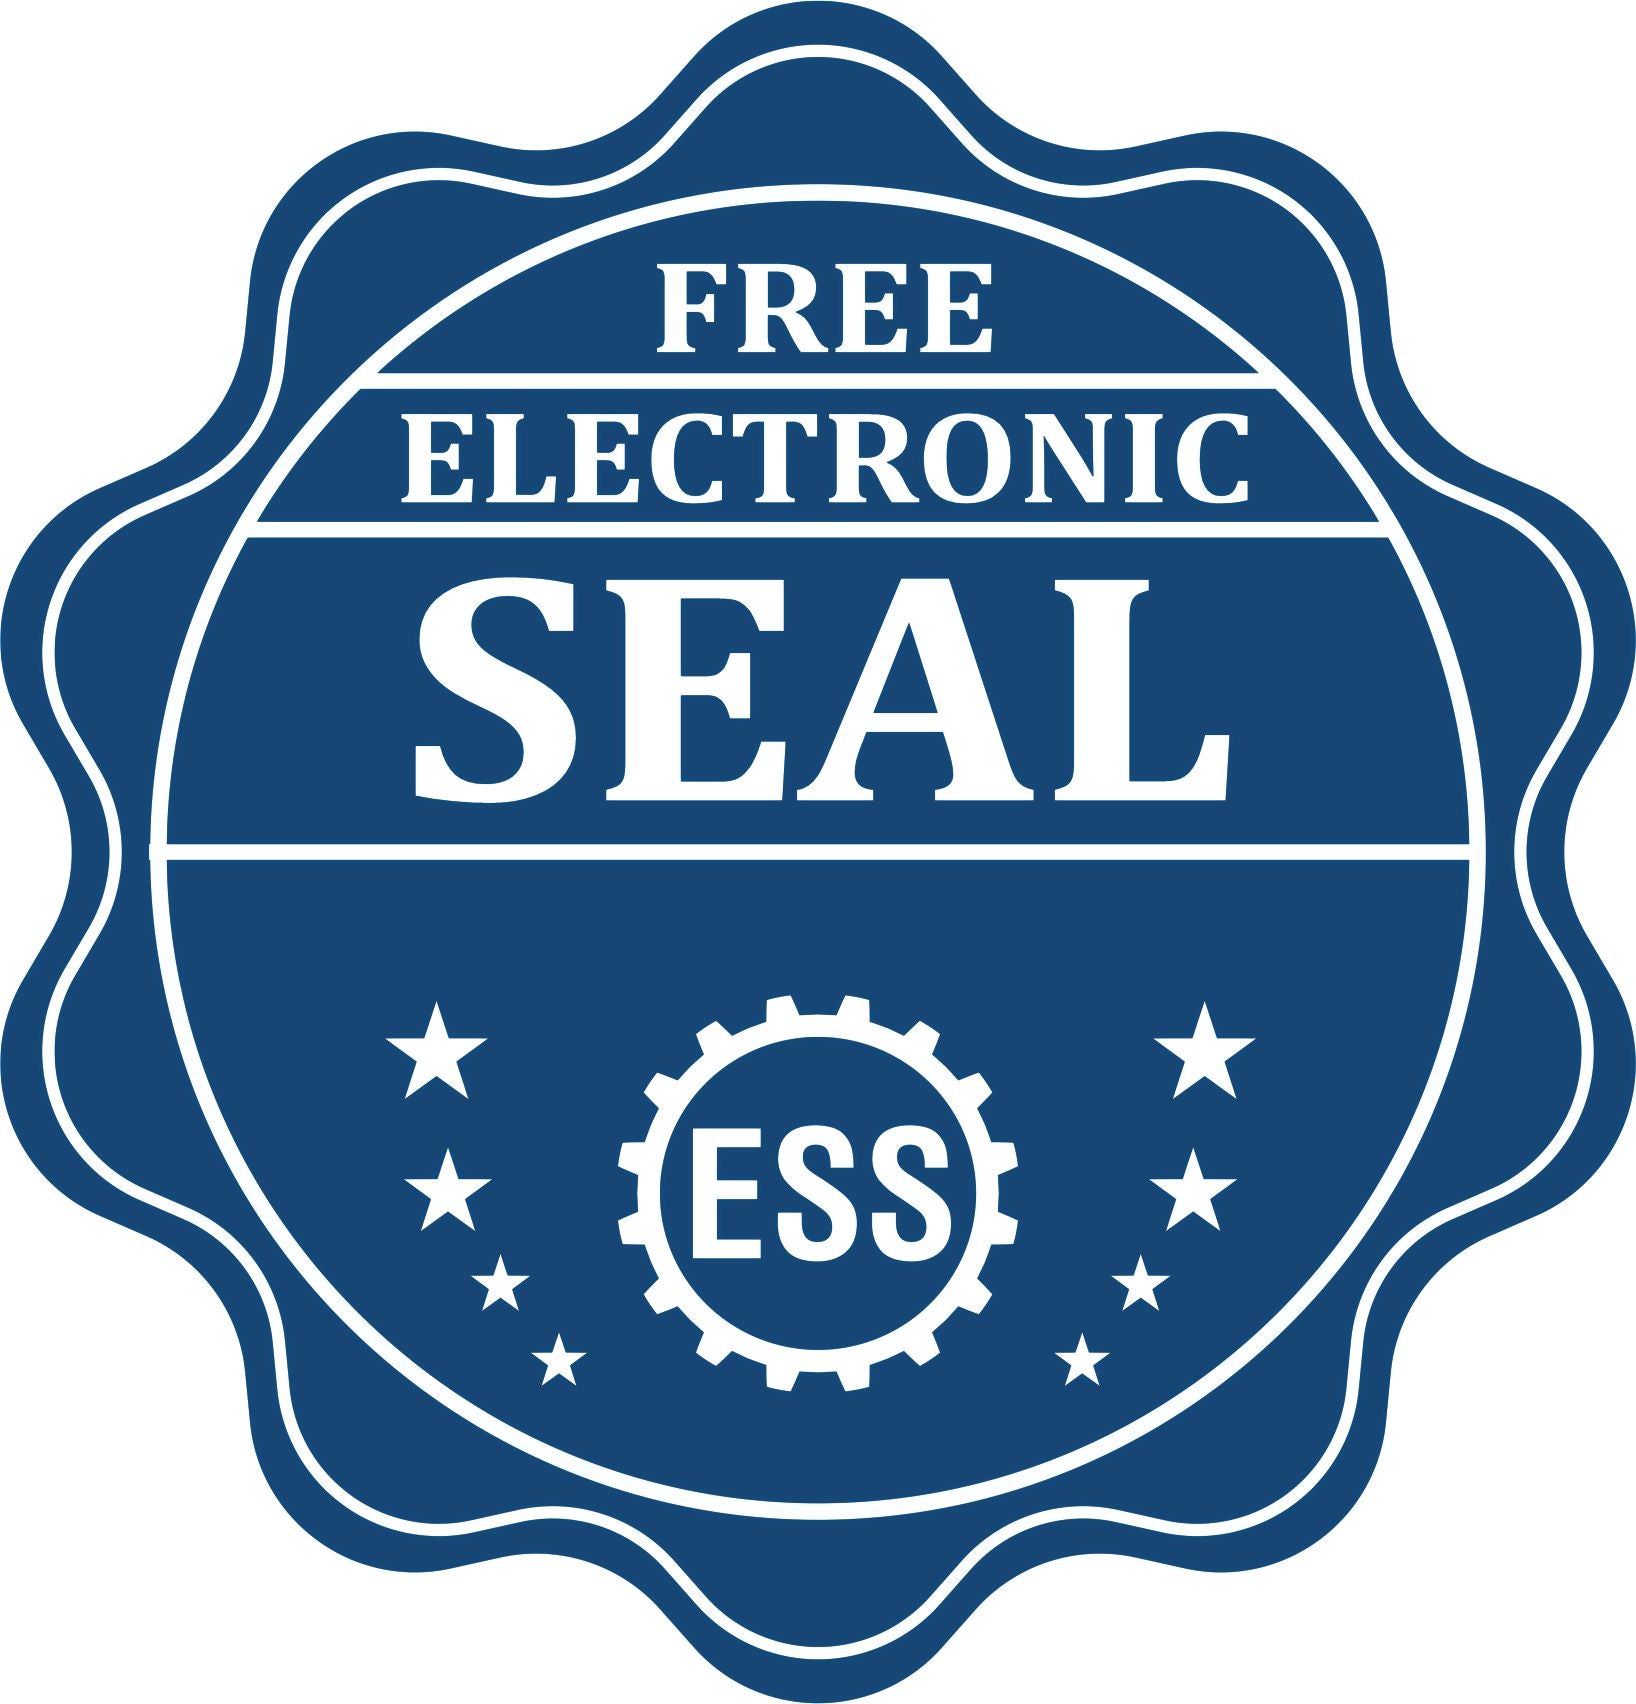 A badge showing a free electronic seal for the Soft Pocket Alabama Landscape Architect Embosser with stars and the ESS gear on the emblem.